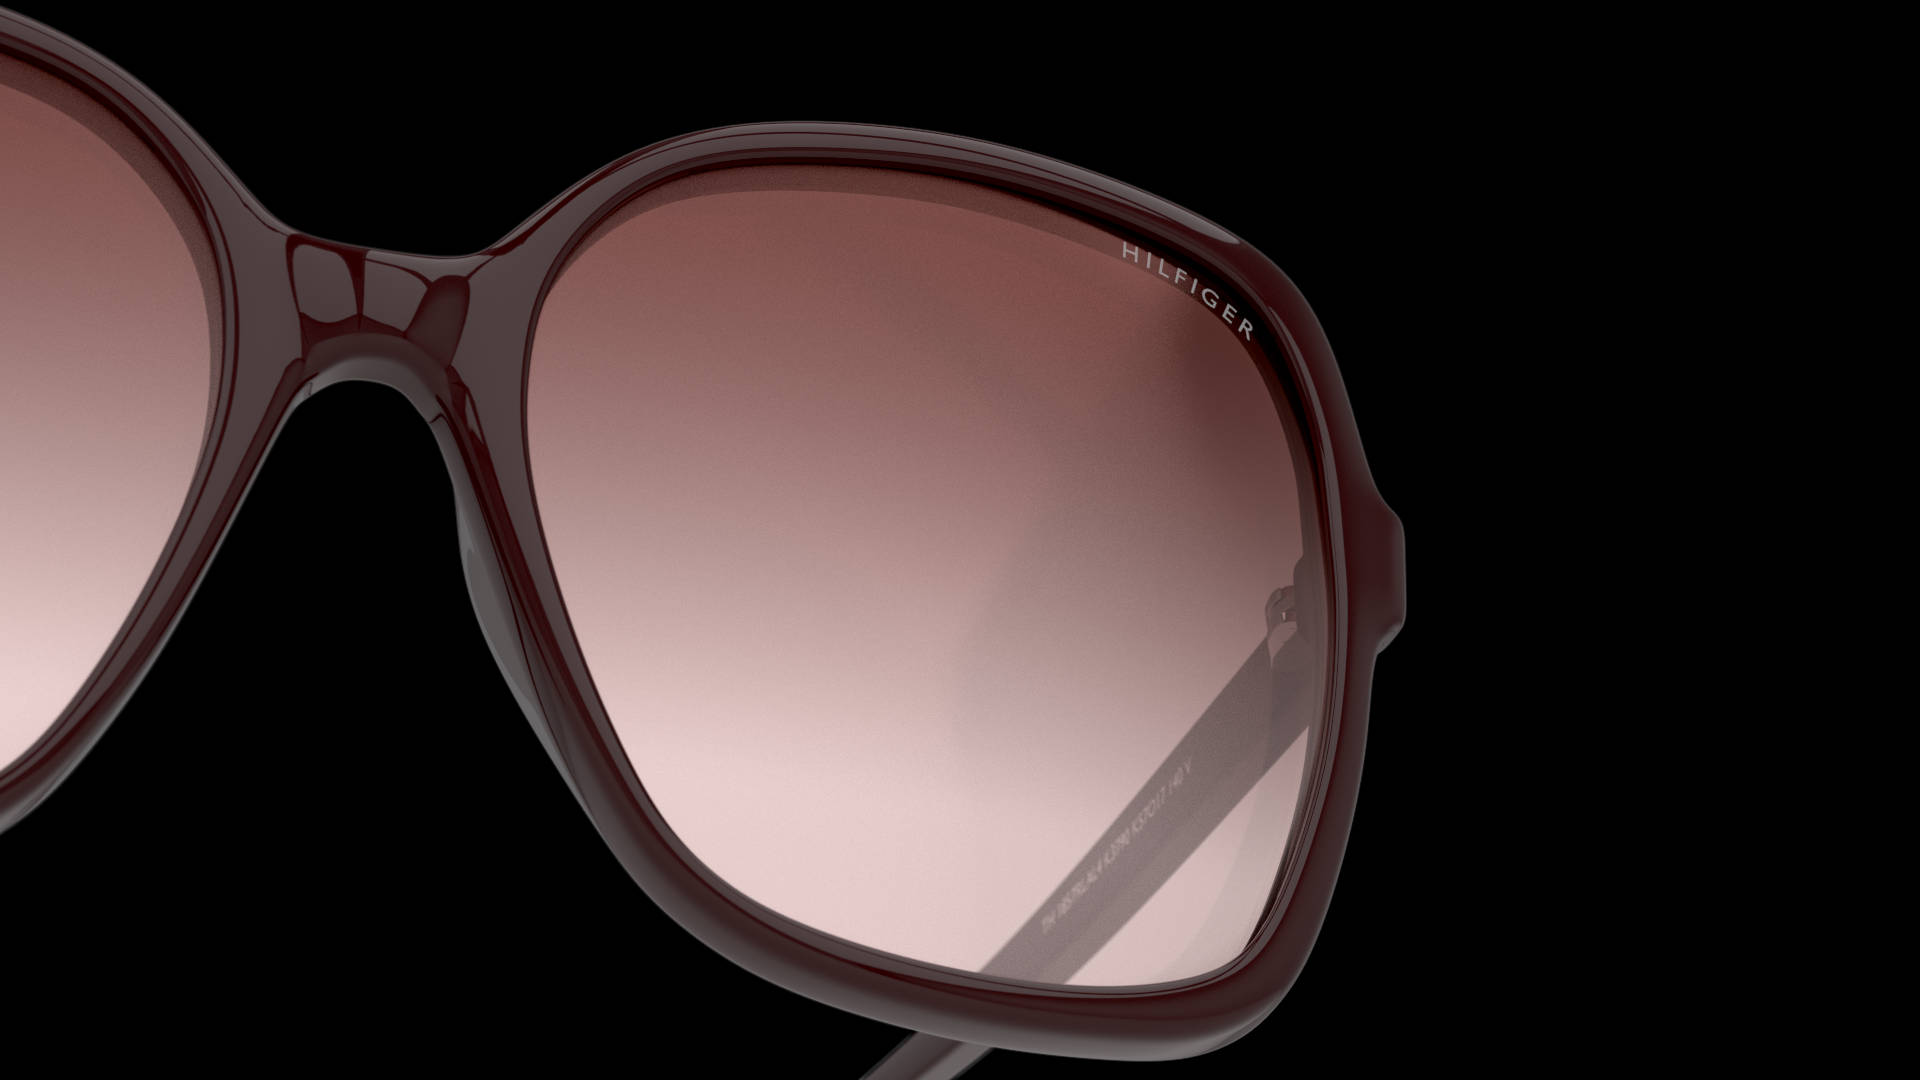 Tommy Hilfiger TH 1857 Iconic Sunglasses Wallpaper